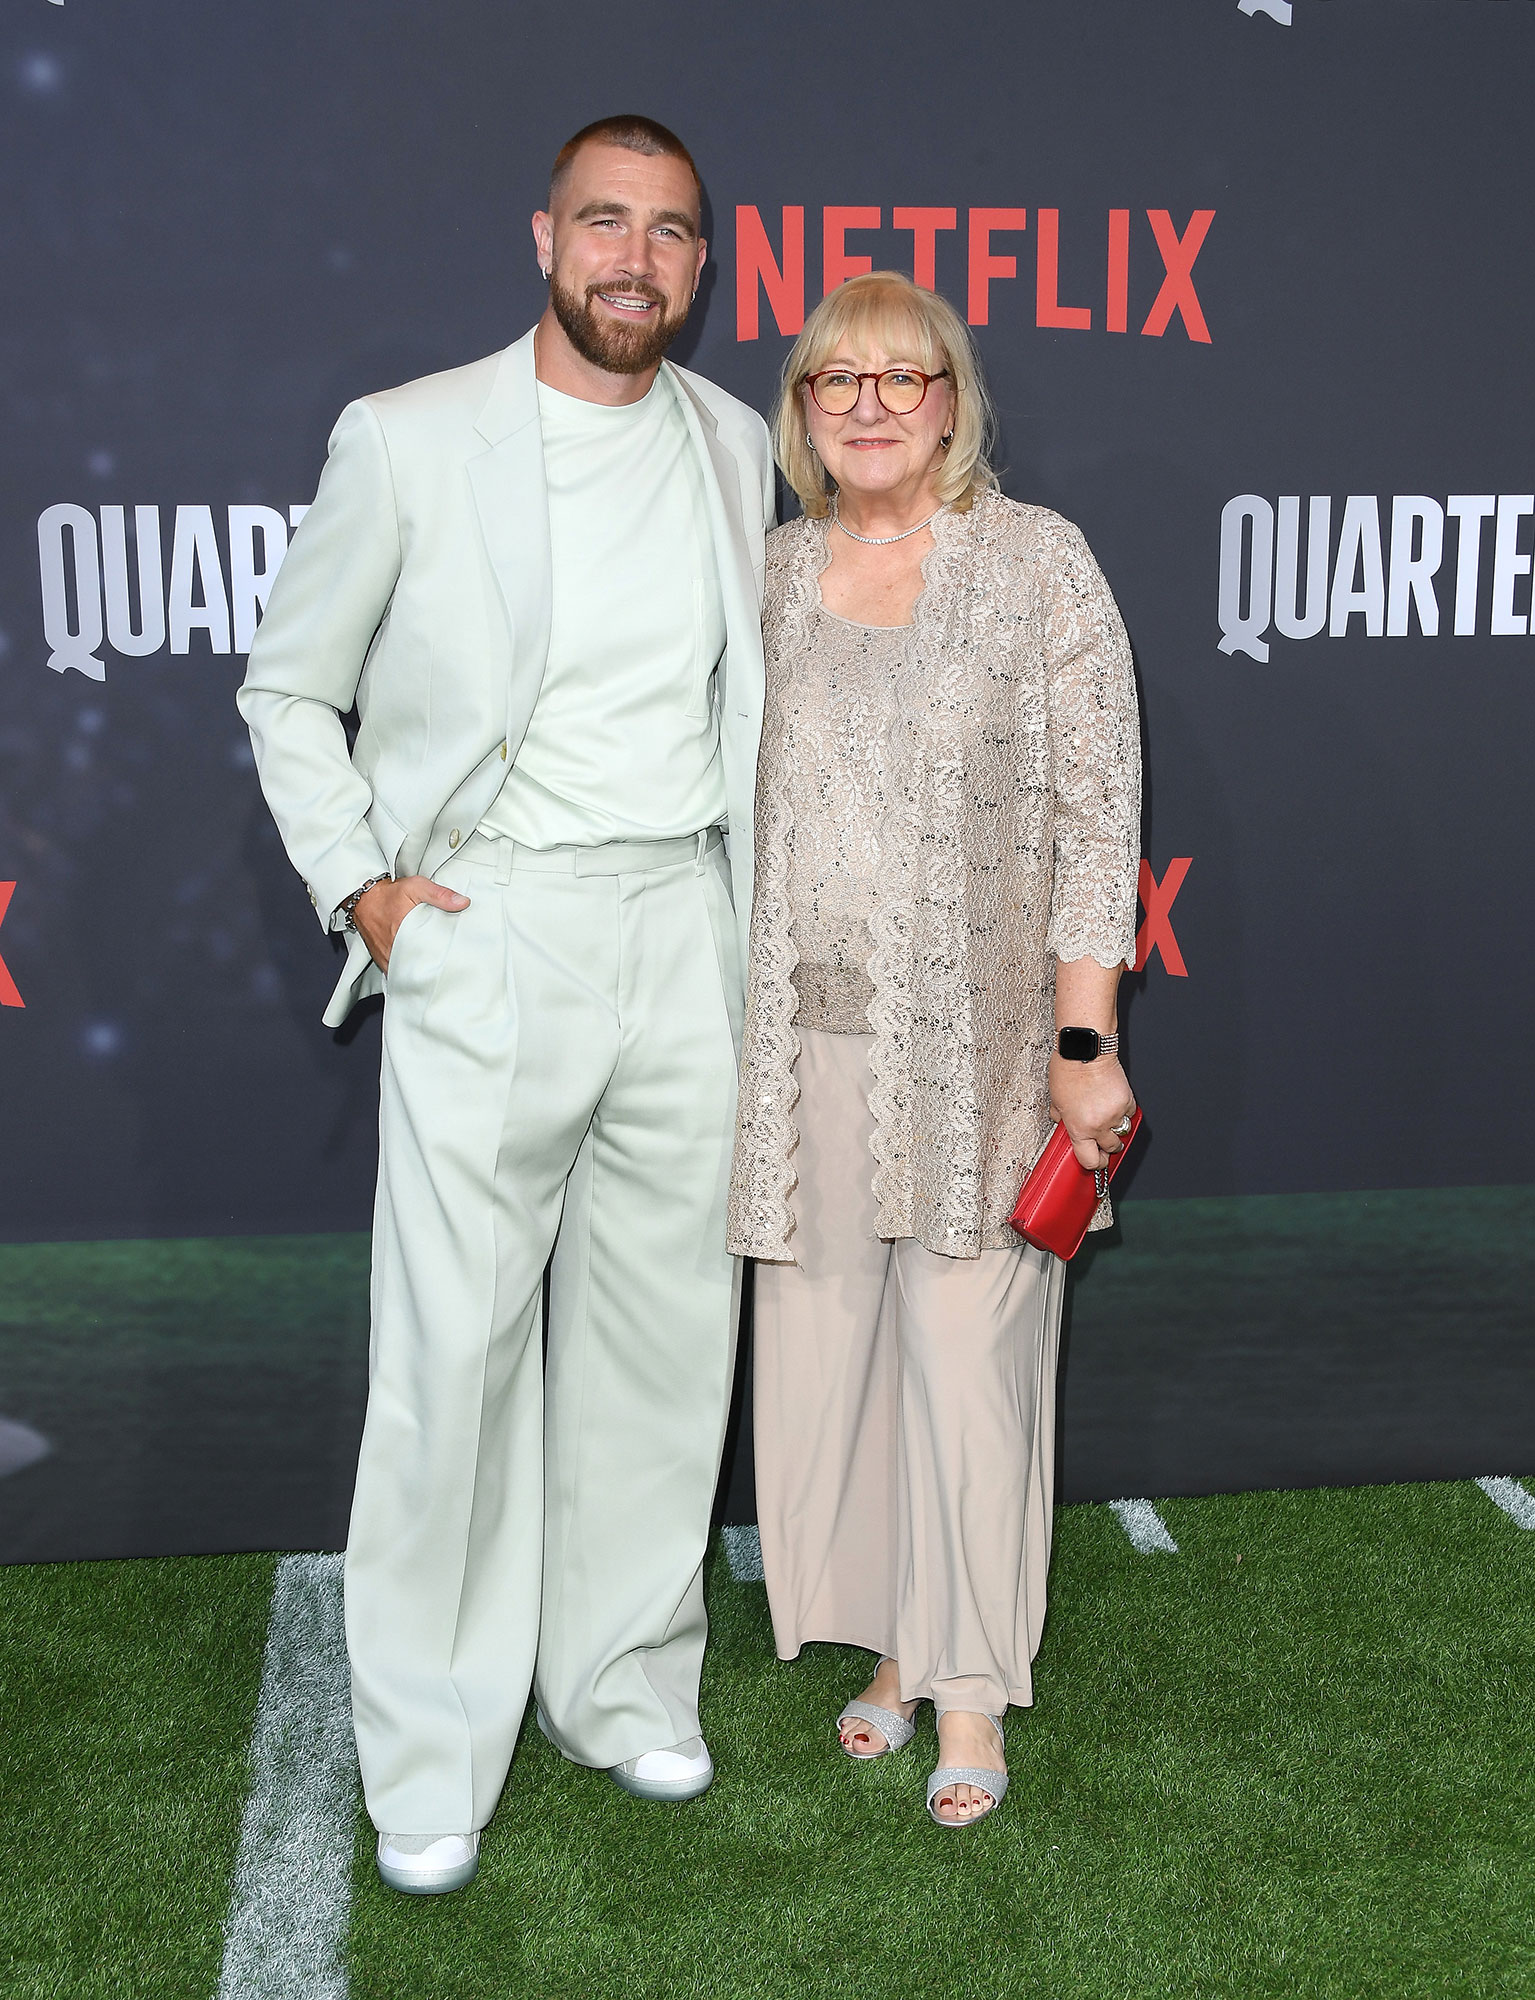 Mama Kelce Shows Off Super Bowl Outfit Supporting Both Sons